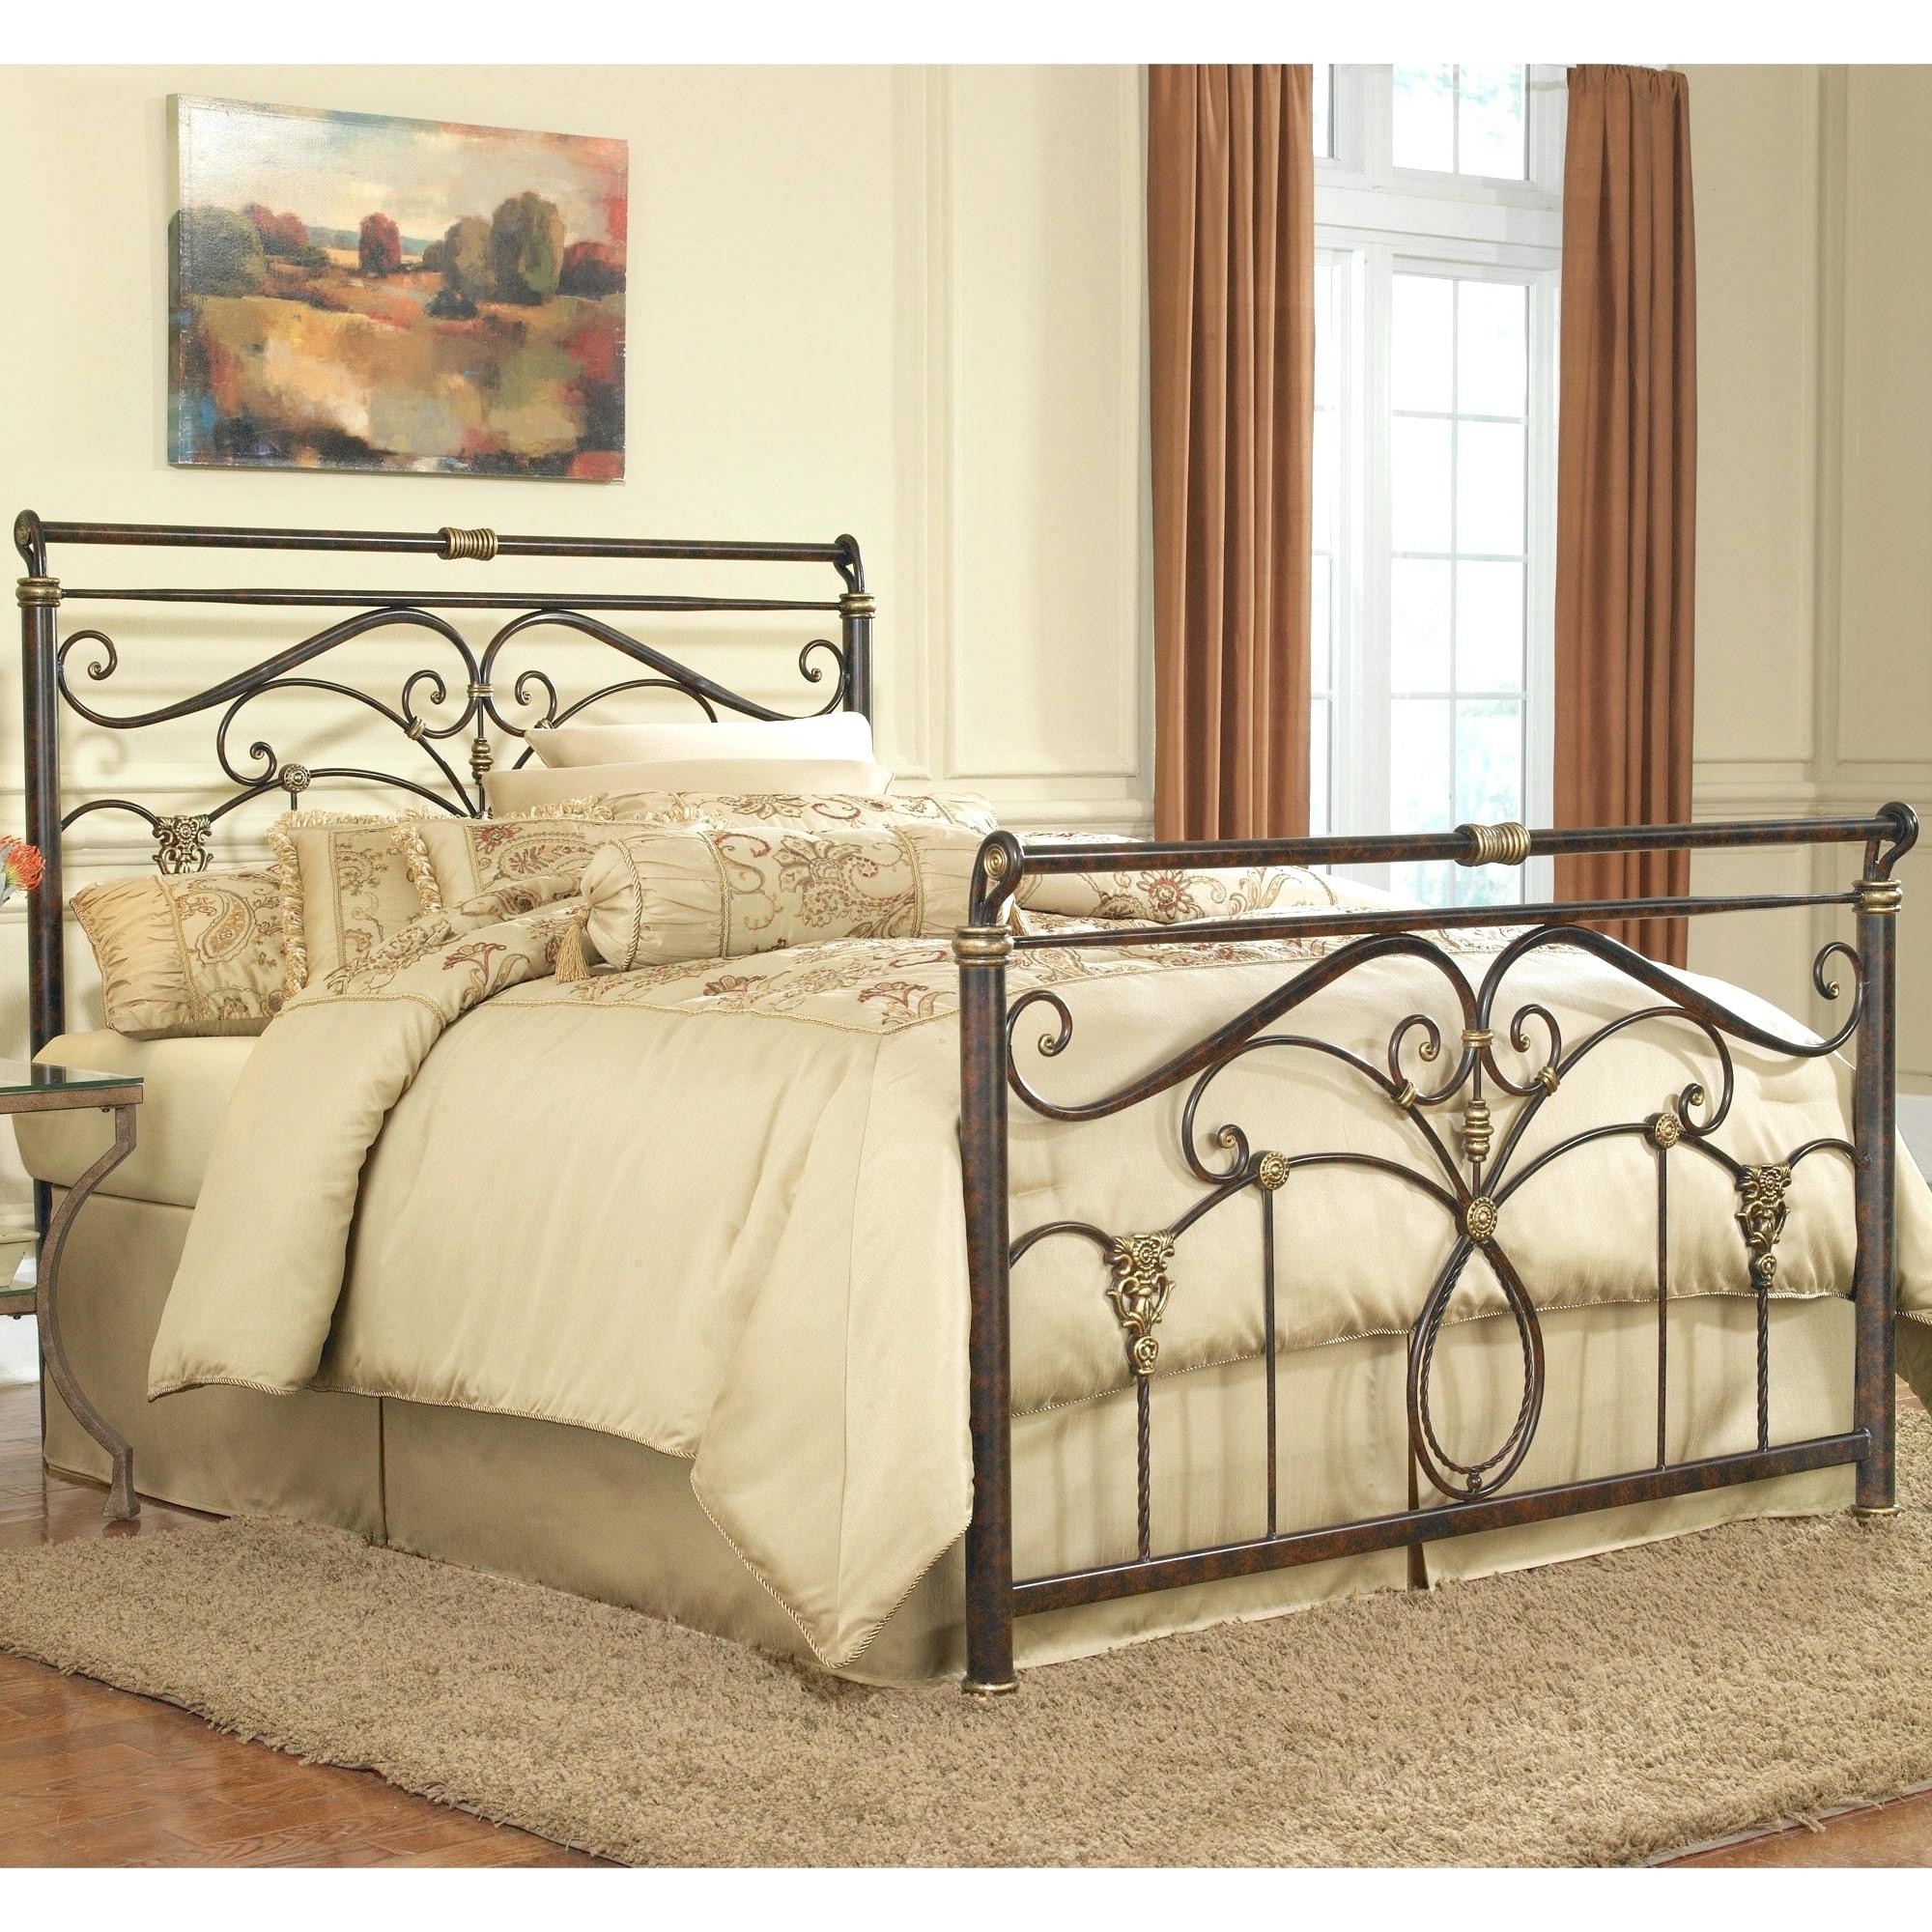 2000x2000 Full Size of Bed Frames Wallpaper:hd Discount Iron Beds Antique Wrought  Iron Bed Ashley Large Size of Bed Frames Wallpaper:hd Discount Iron Beds  Antique ...